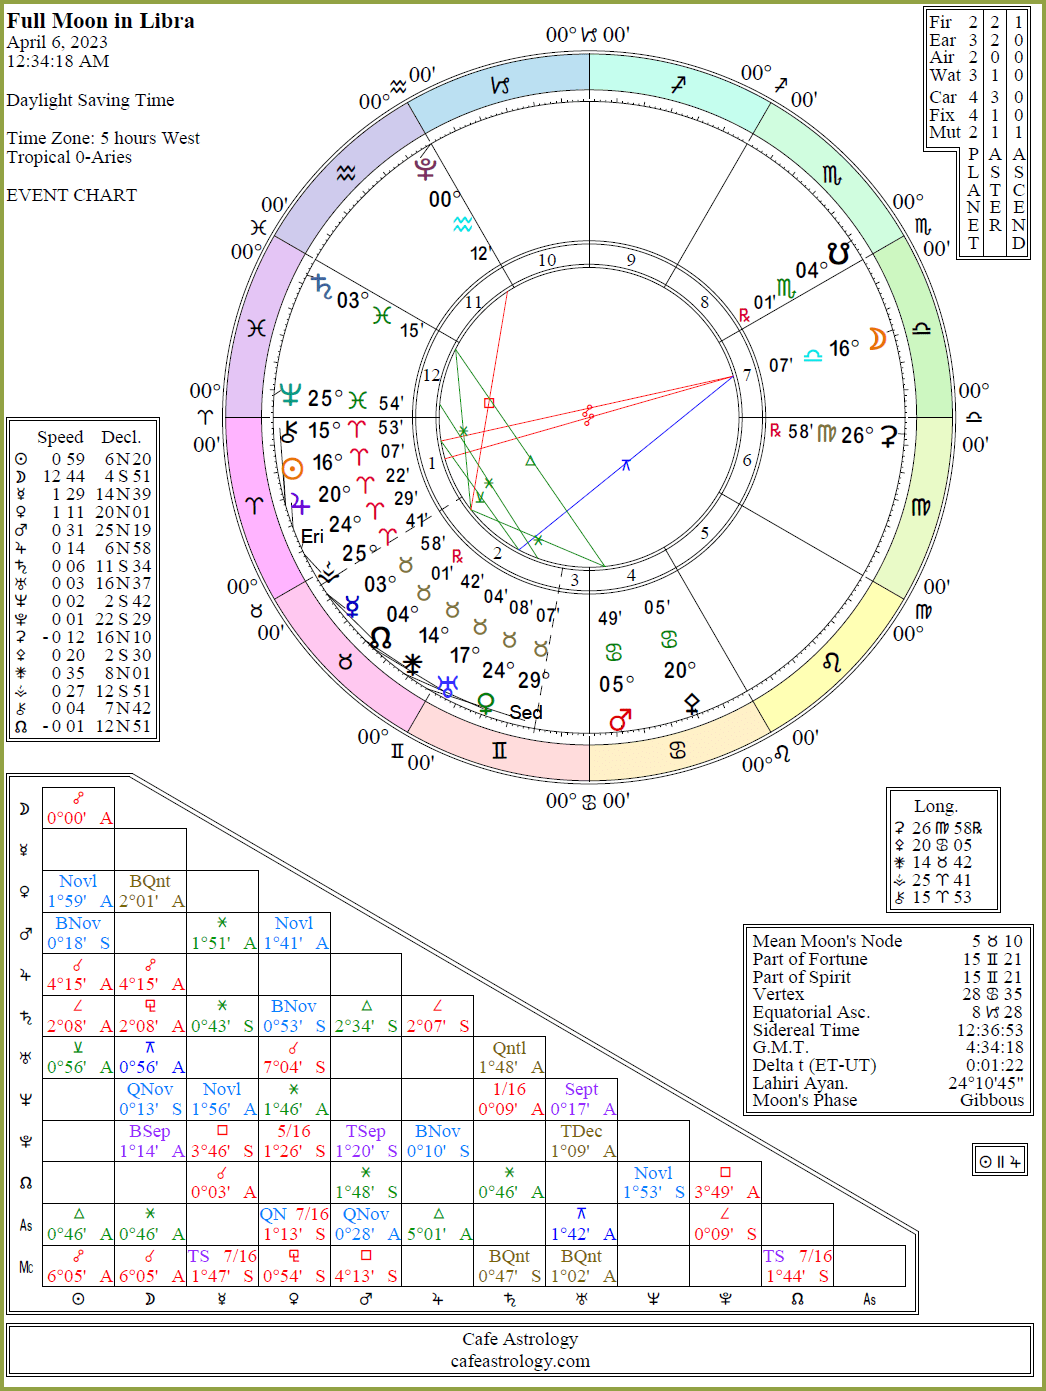 Full Moon on April 6, 2023 Cafe Astrology